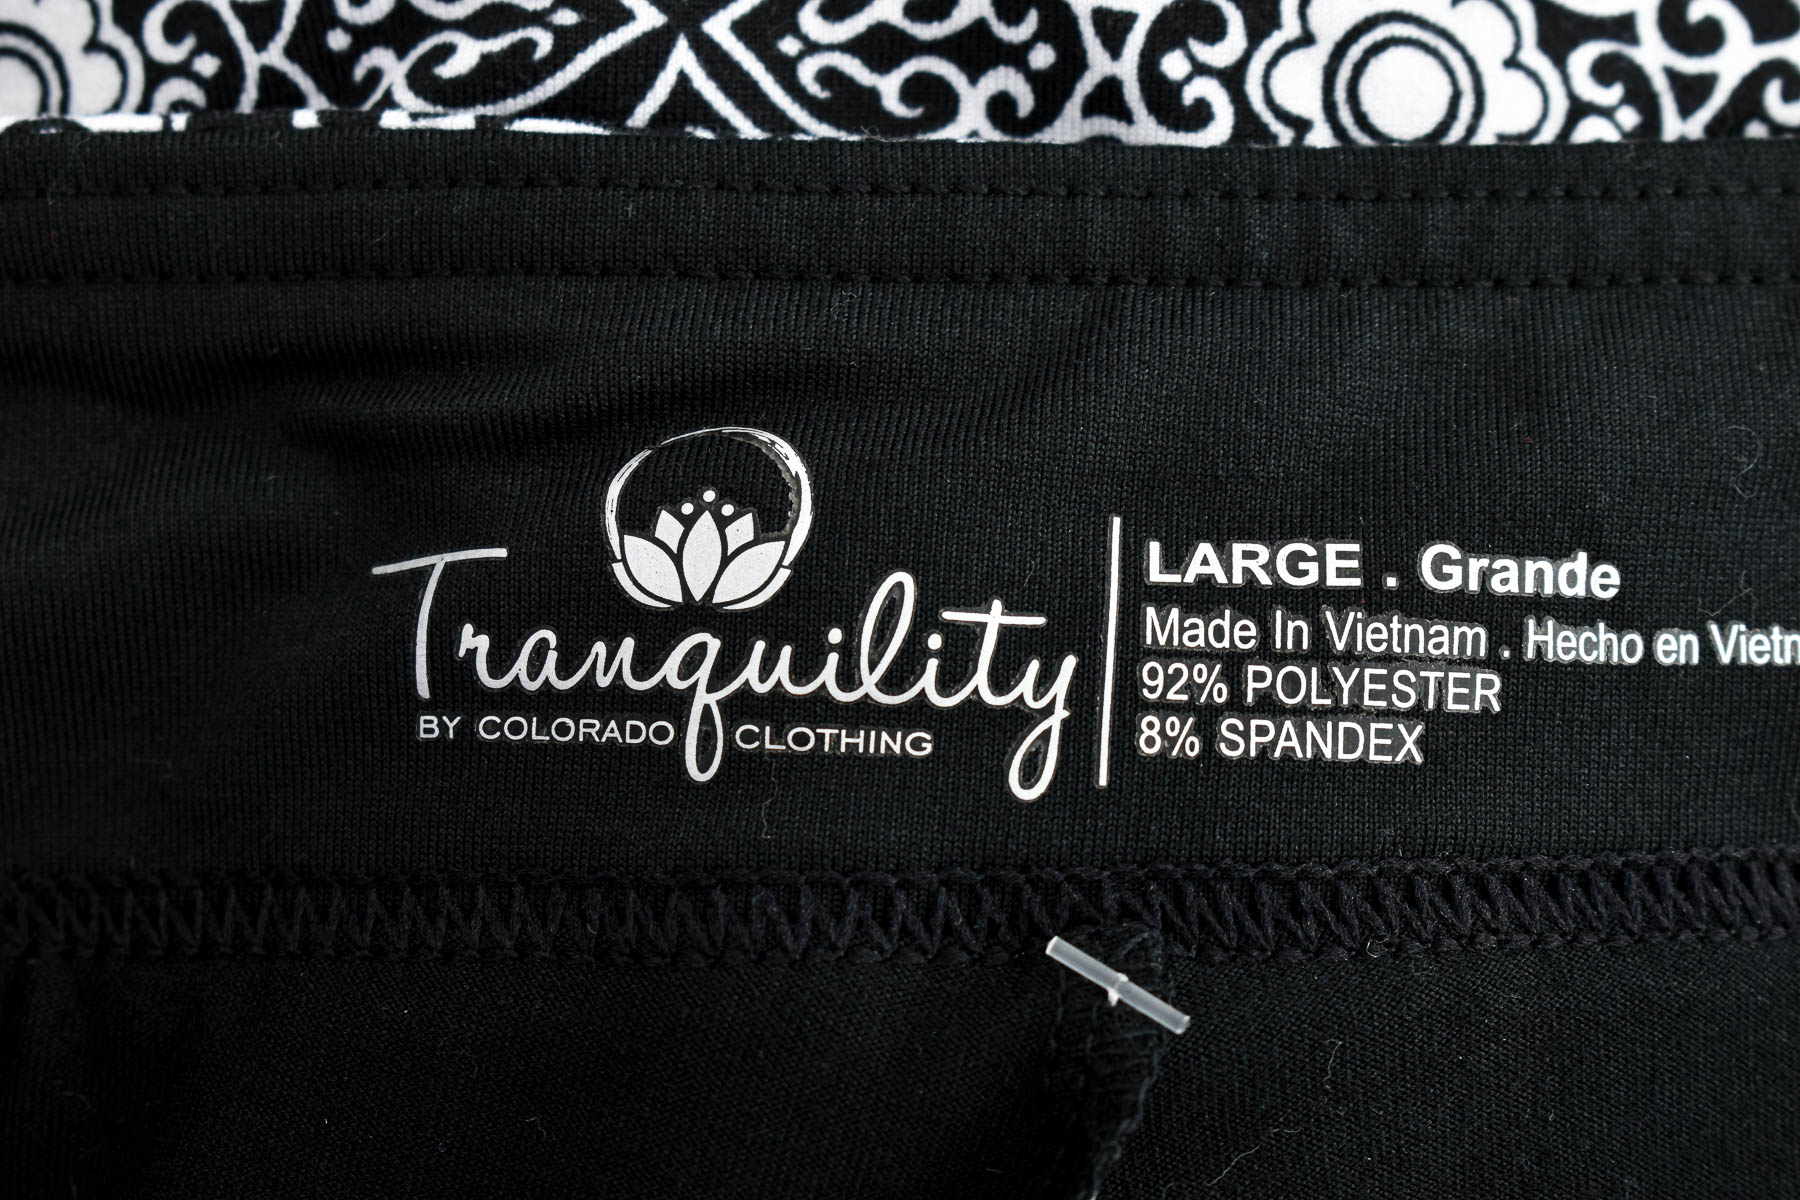 Skirt - Tranquility BY COLORADO CLOTHING - 2